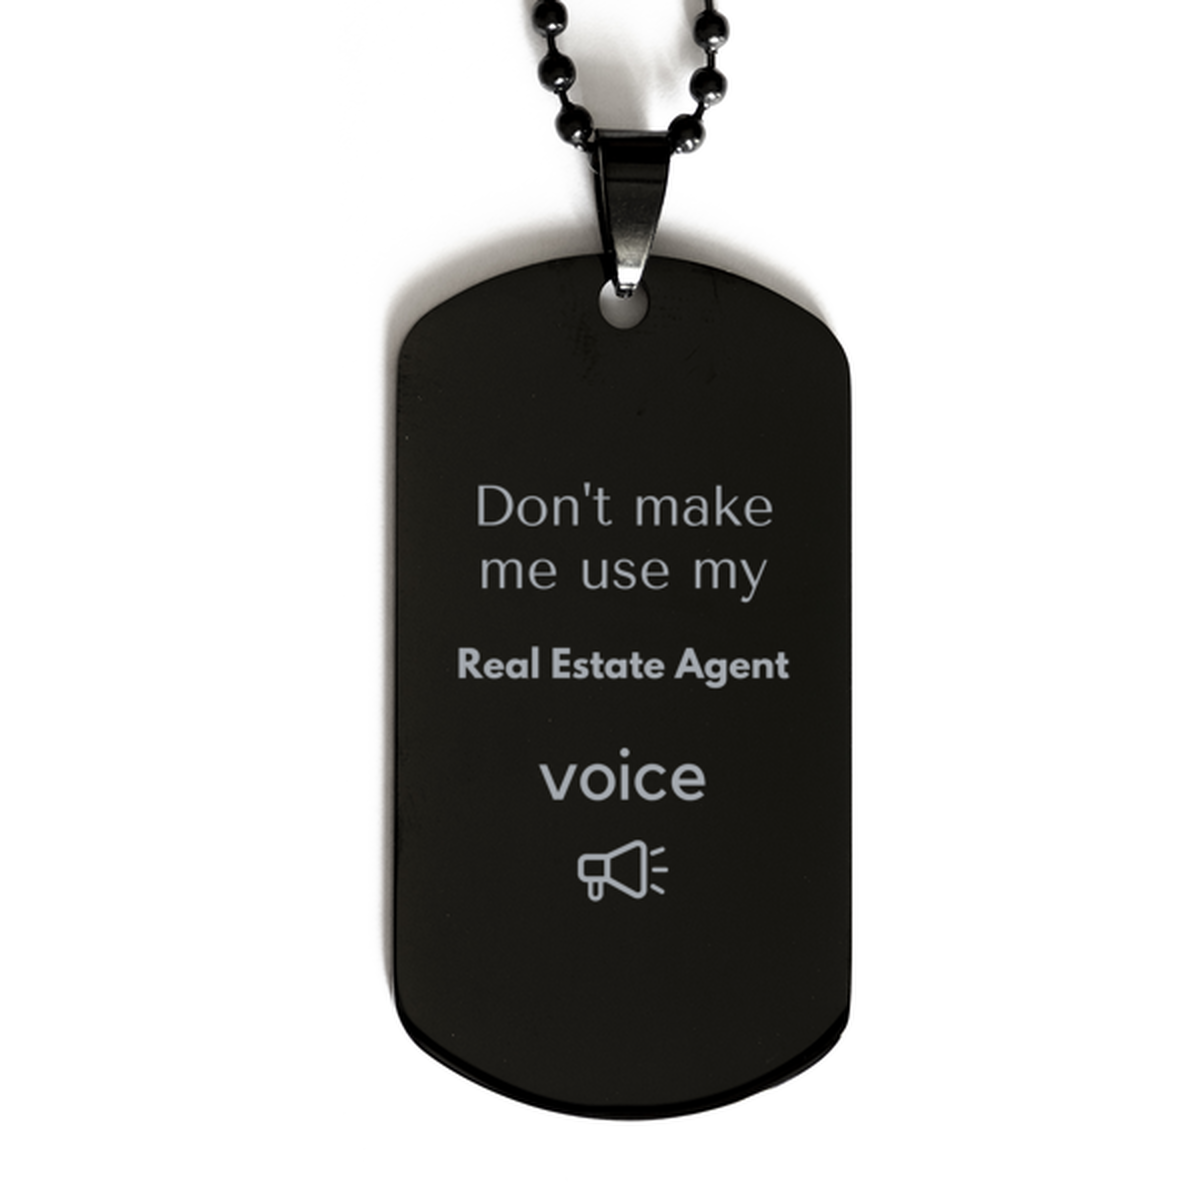 Don't make me use my Real Estate Agent voice, Sarcasm Real Estate Agent Gifts, Christmas Real Estate Agent Black Dog Tag Birthday Unique Gifts For Real Estate Agent Coworkers, Men, Women, Colleague, Friends